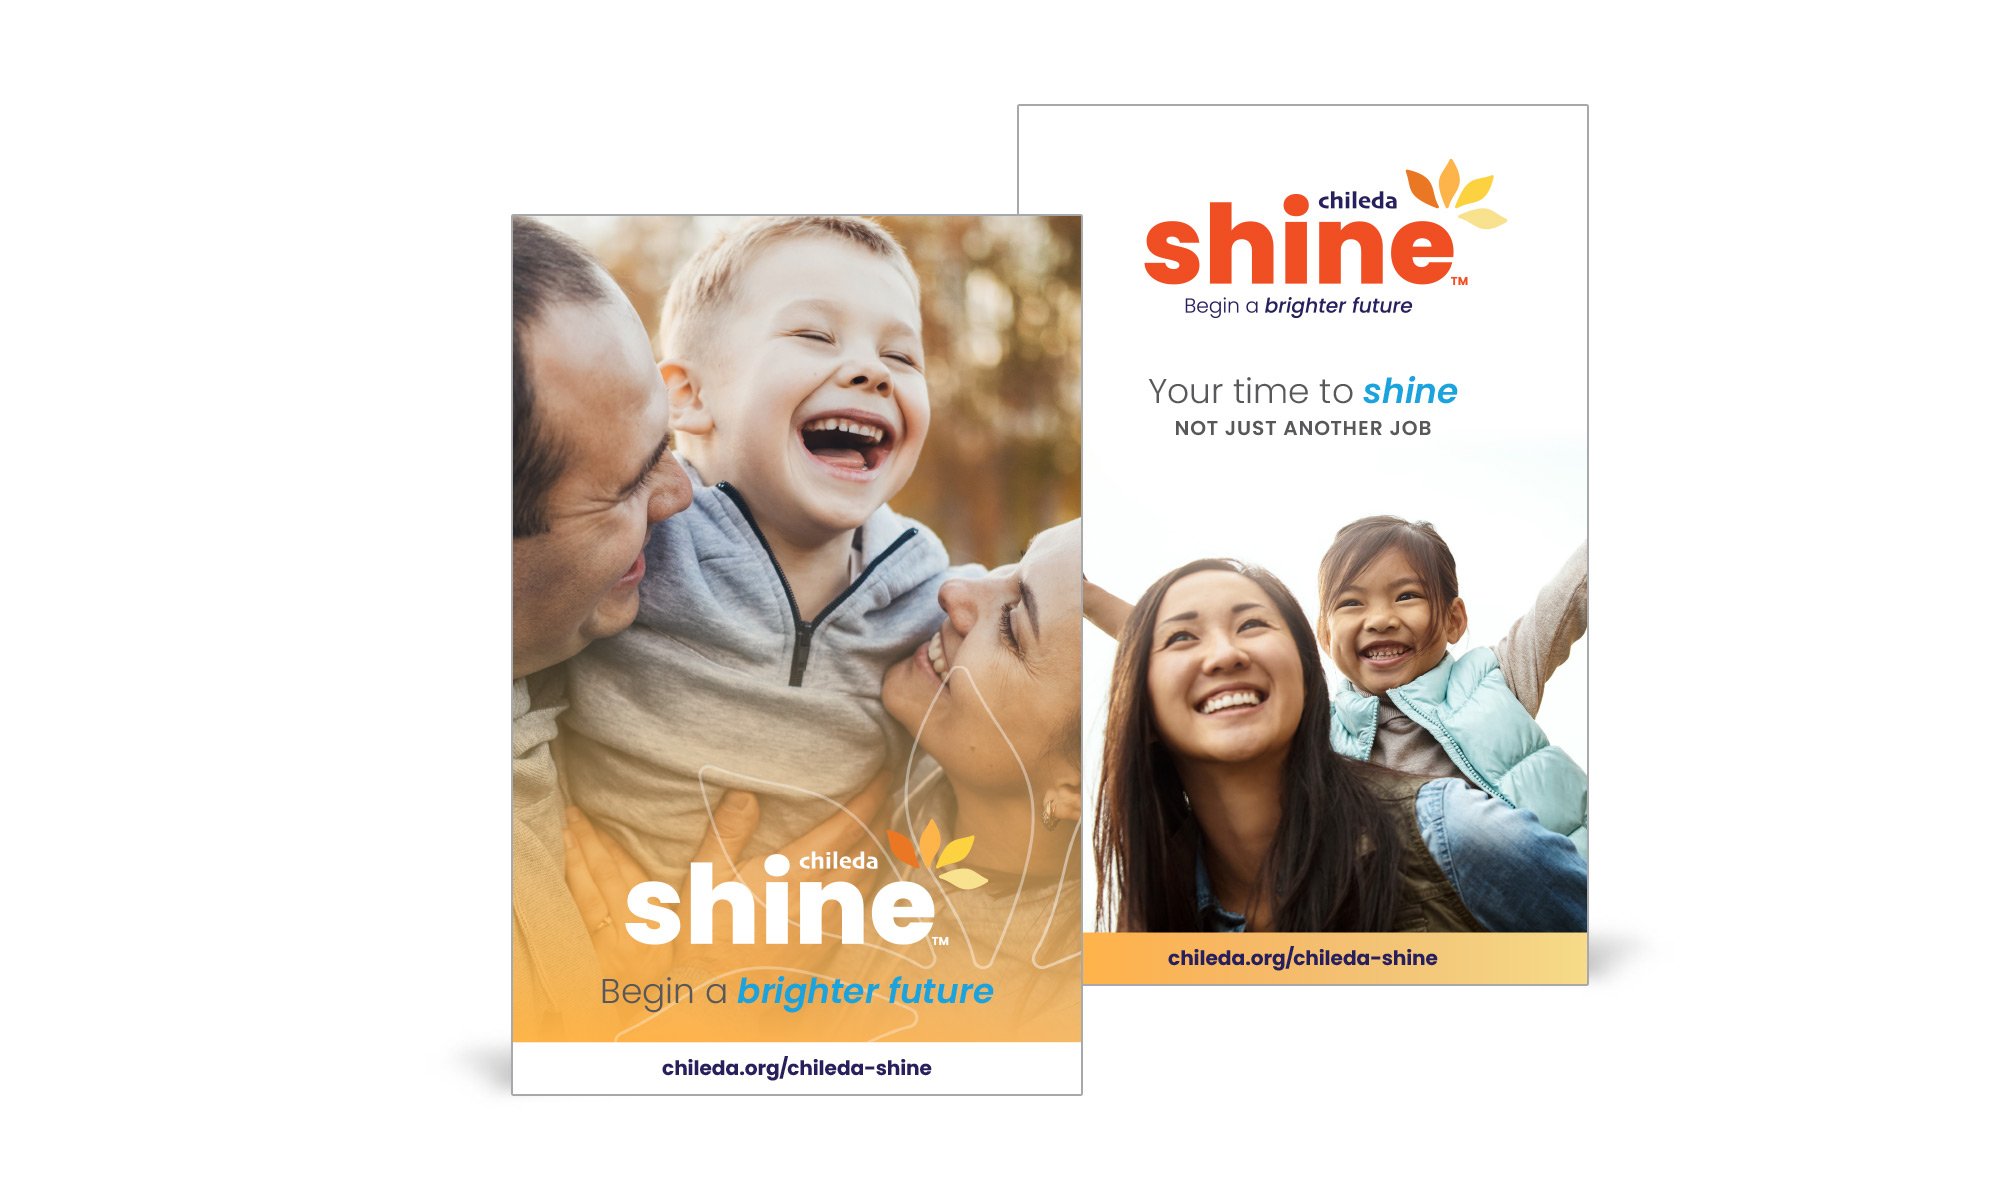 Chileda Shine brochure. Cover has mother and daughter smiling and says "Your time to shine. Not just another job". The other cover has a son laughing with his parents and says "Begin a brighter future"